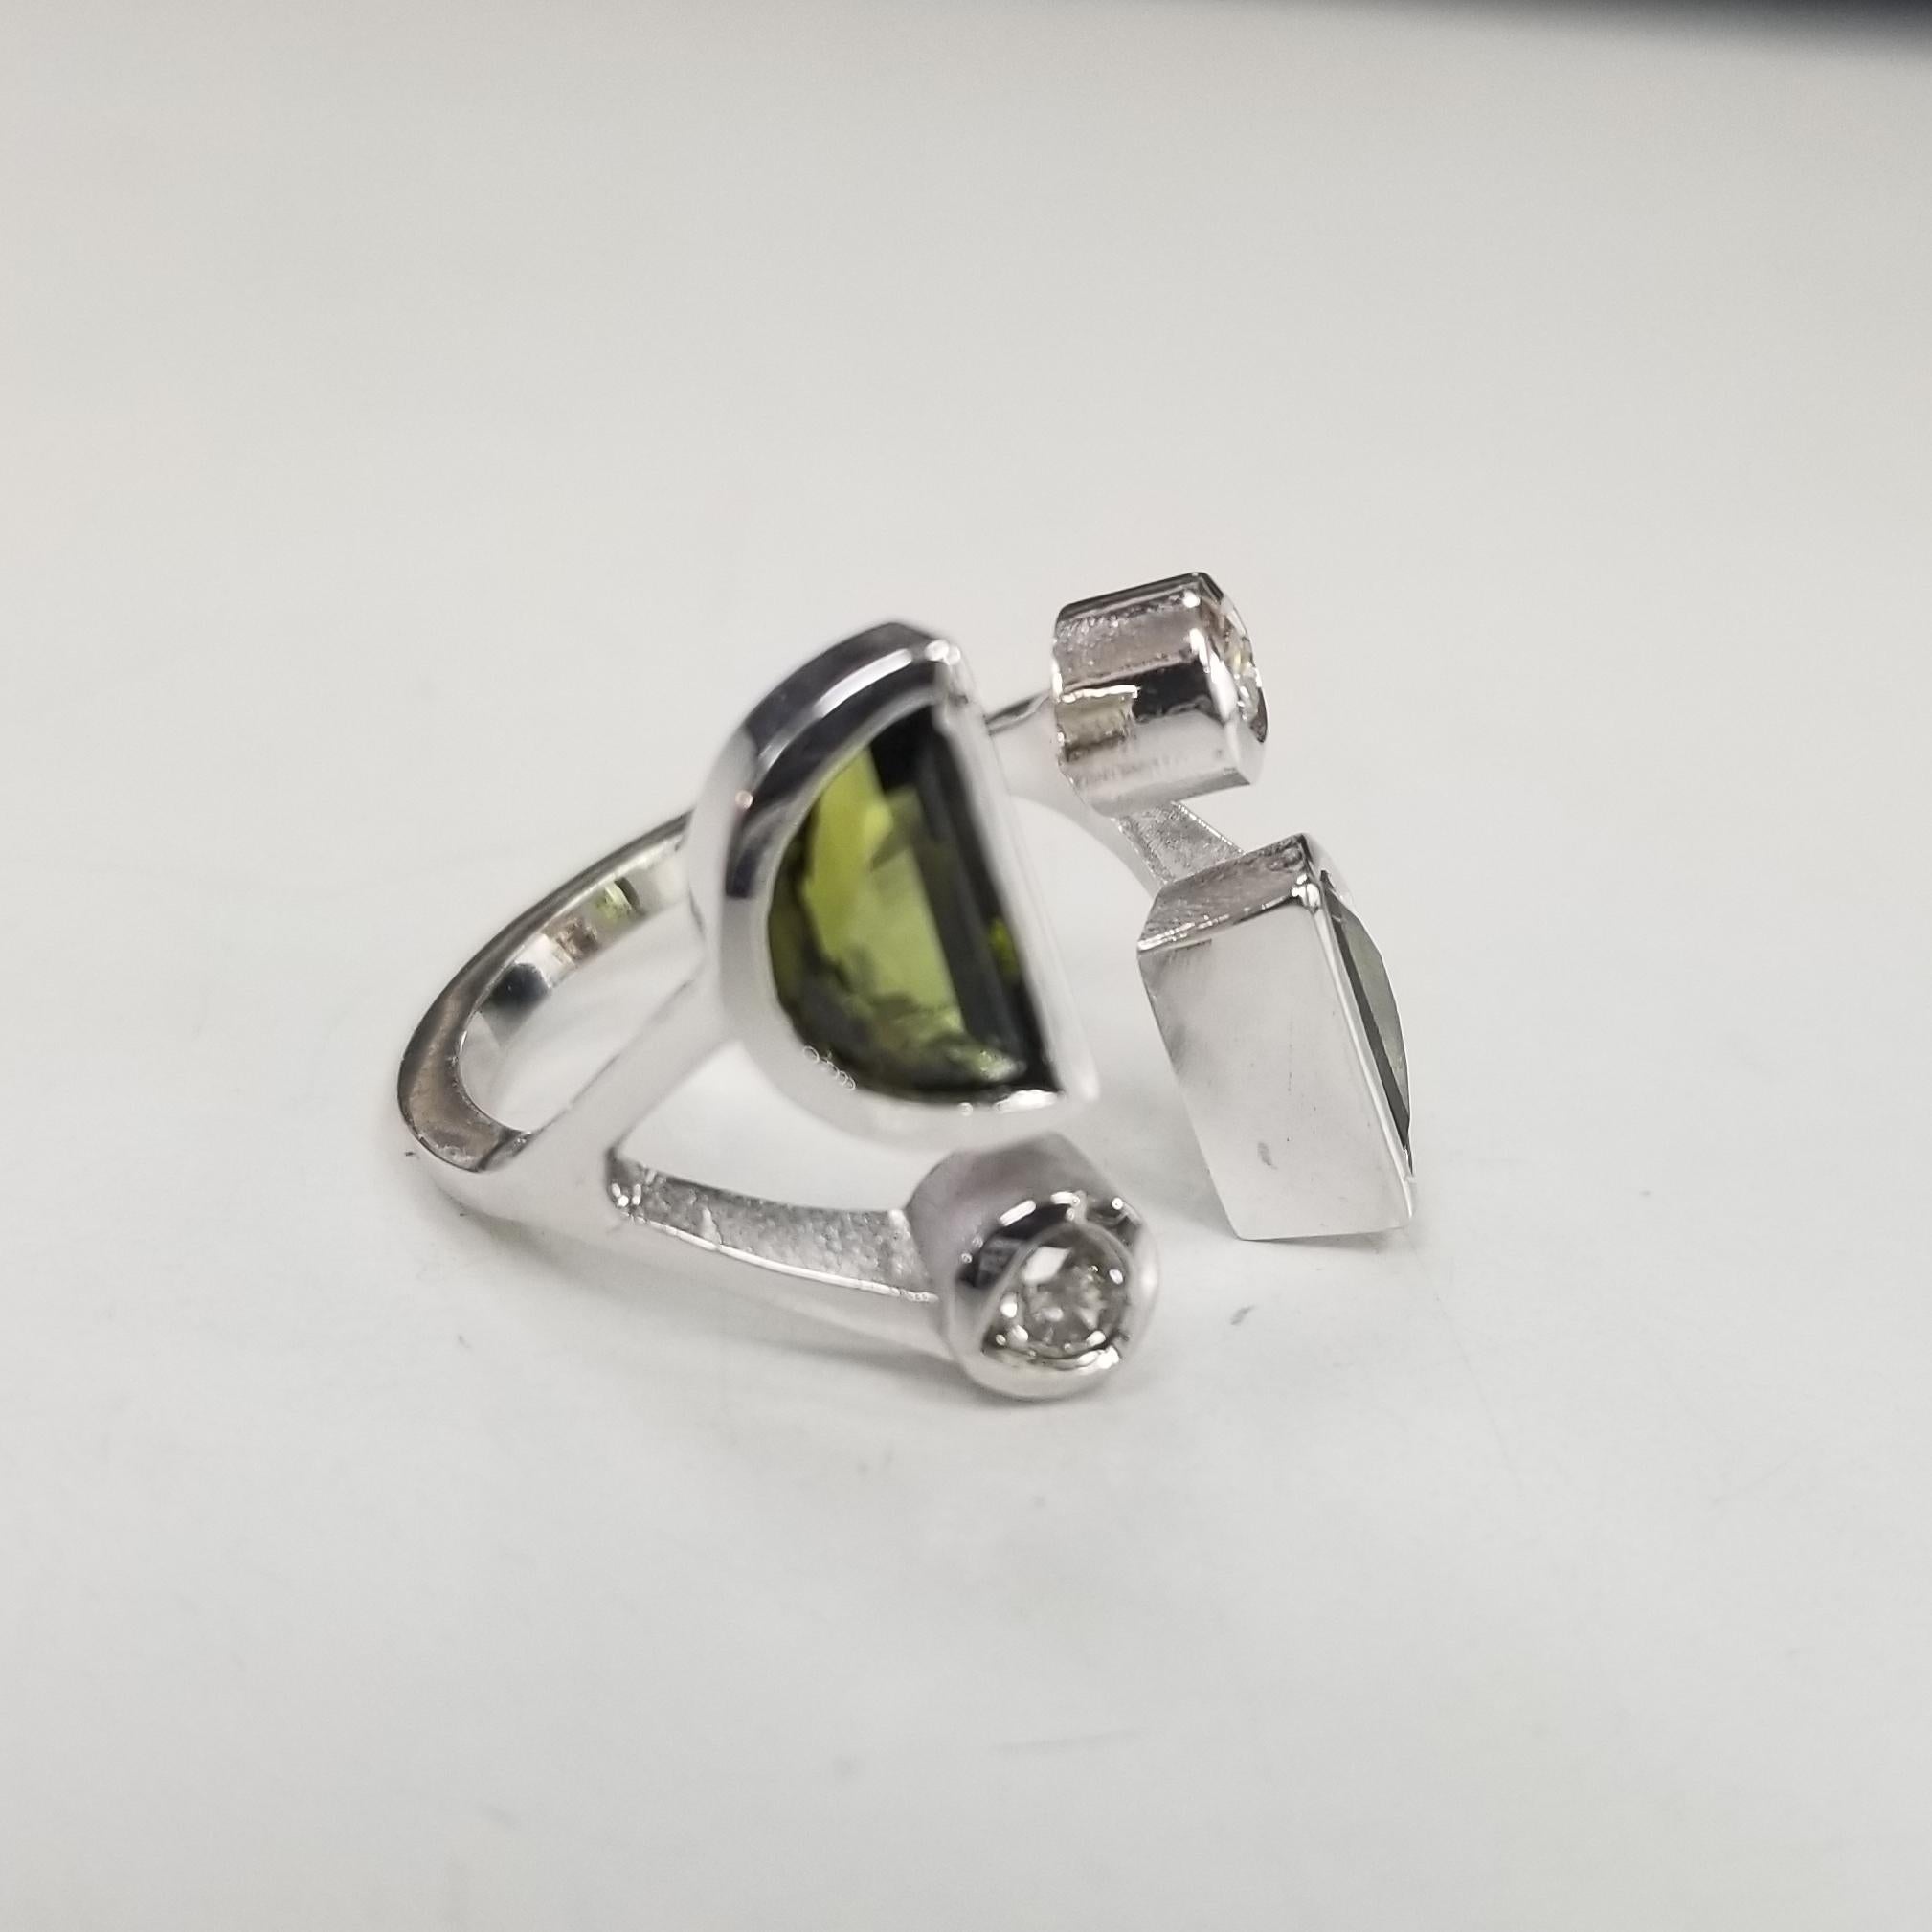 14K white gold Tourmaline and Diamond split ring
Specifications:
    MAIN stone: 2 Diamond  .26cts.
    Additional stones: 2 Tourmaline 1.82cts.
    metal: 14K WHITE GOLD
    type: RING
    weight: 6 GRS 
    size: 66 US
*Pick your stones and shape*